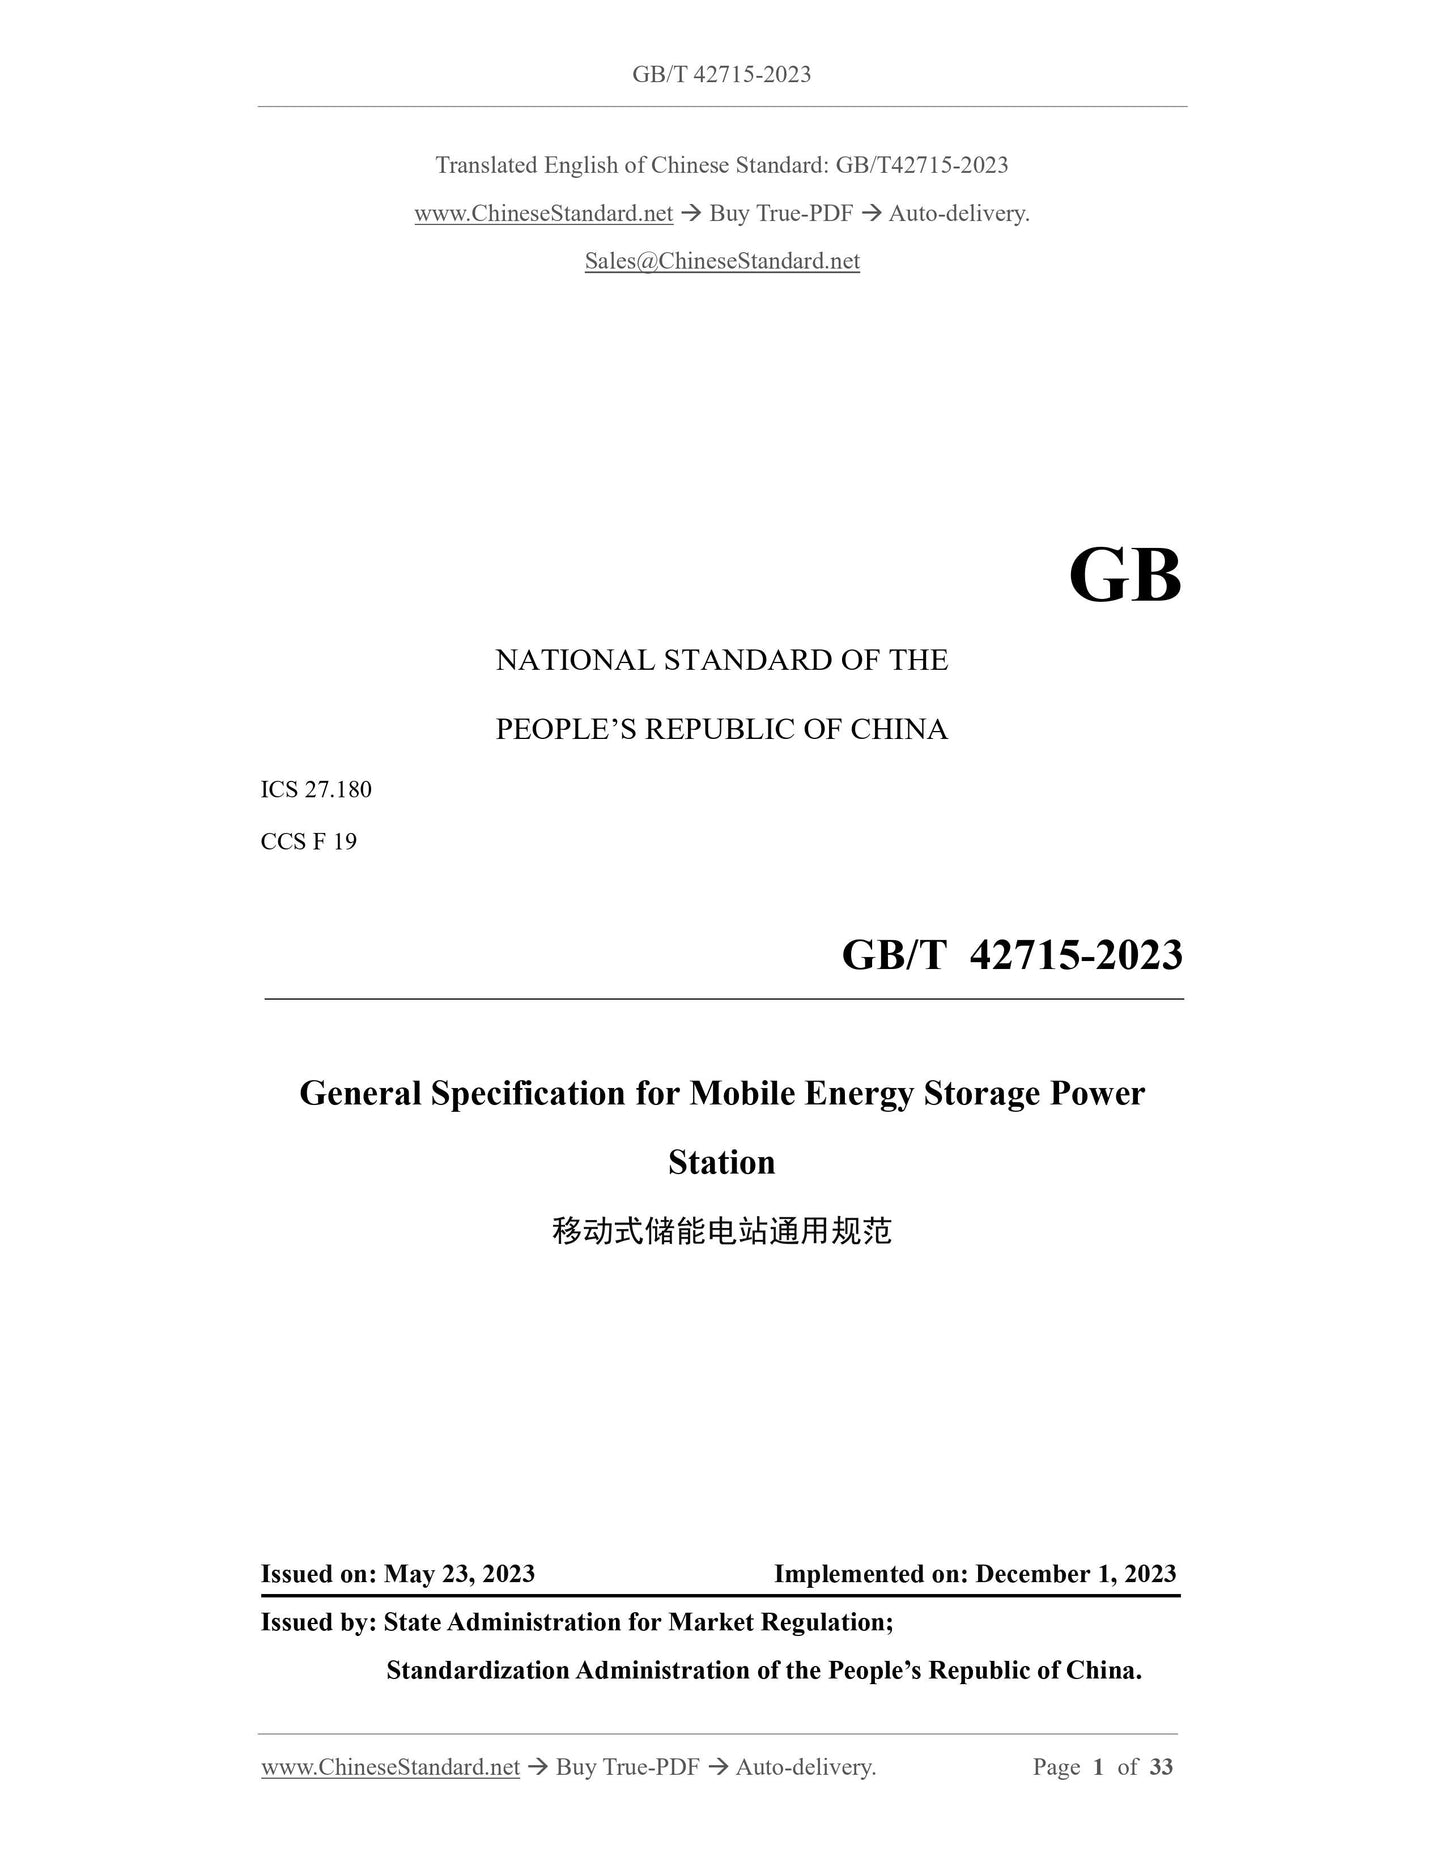 GB/T 42715-2023 Page 1